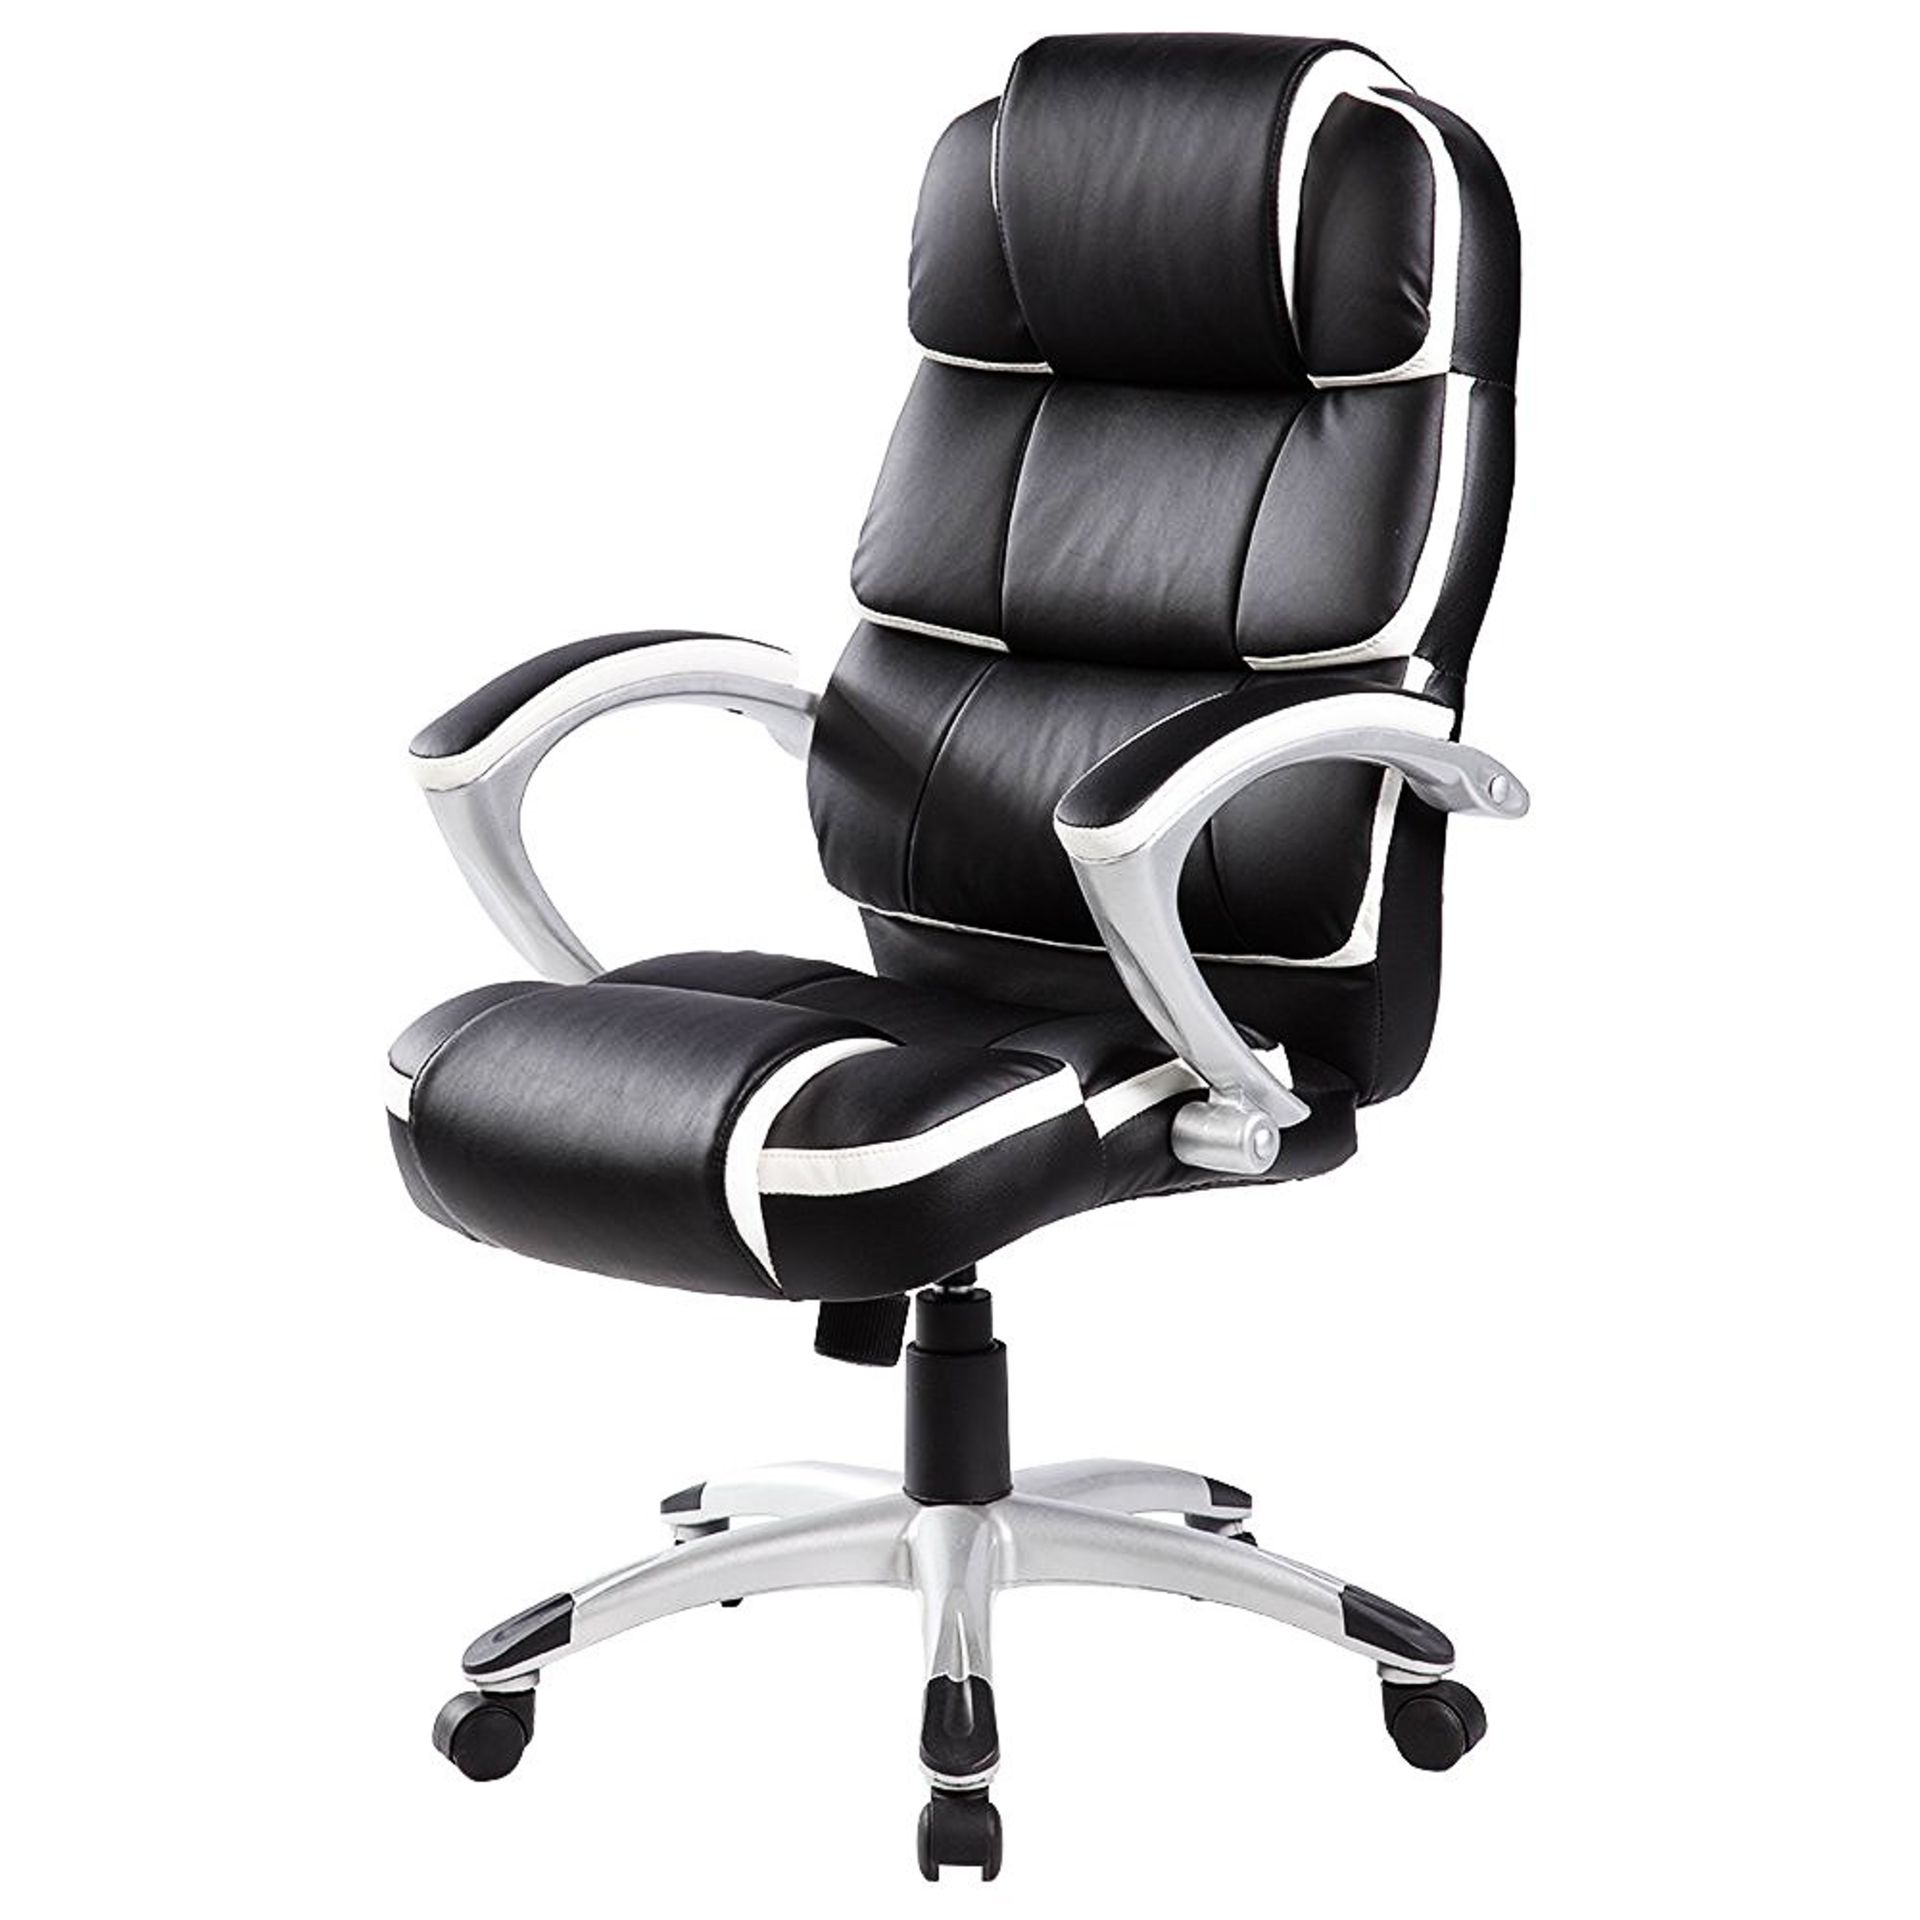 (KK202) Luxury Designer Computer Office Chair - Black with White Accents Our renowned high... - Image 2 of 2